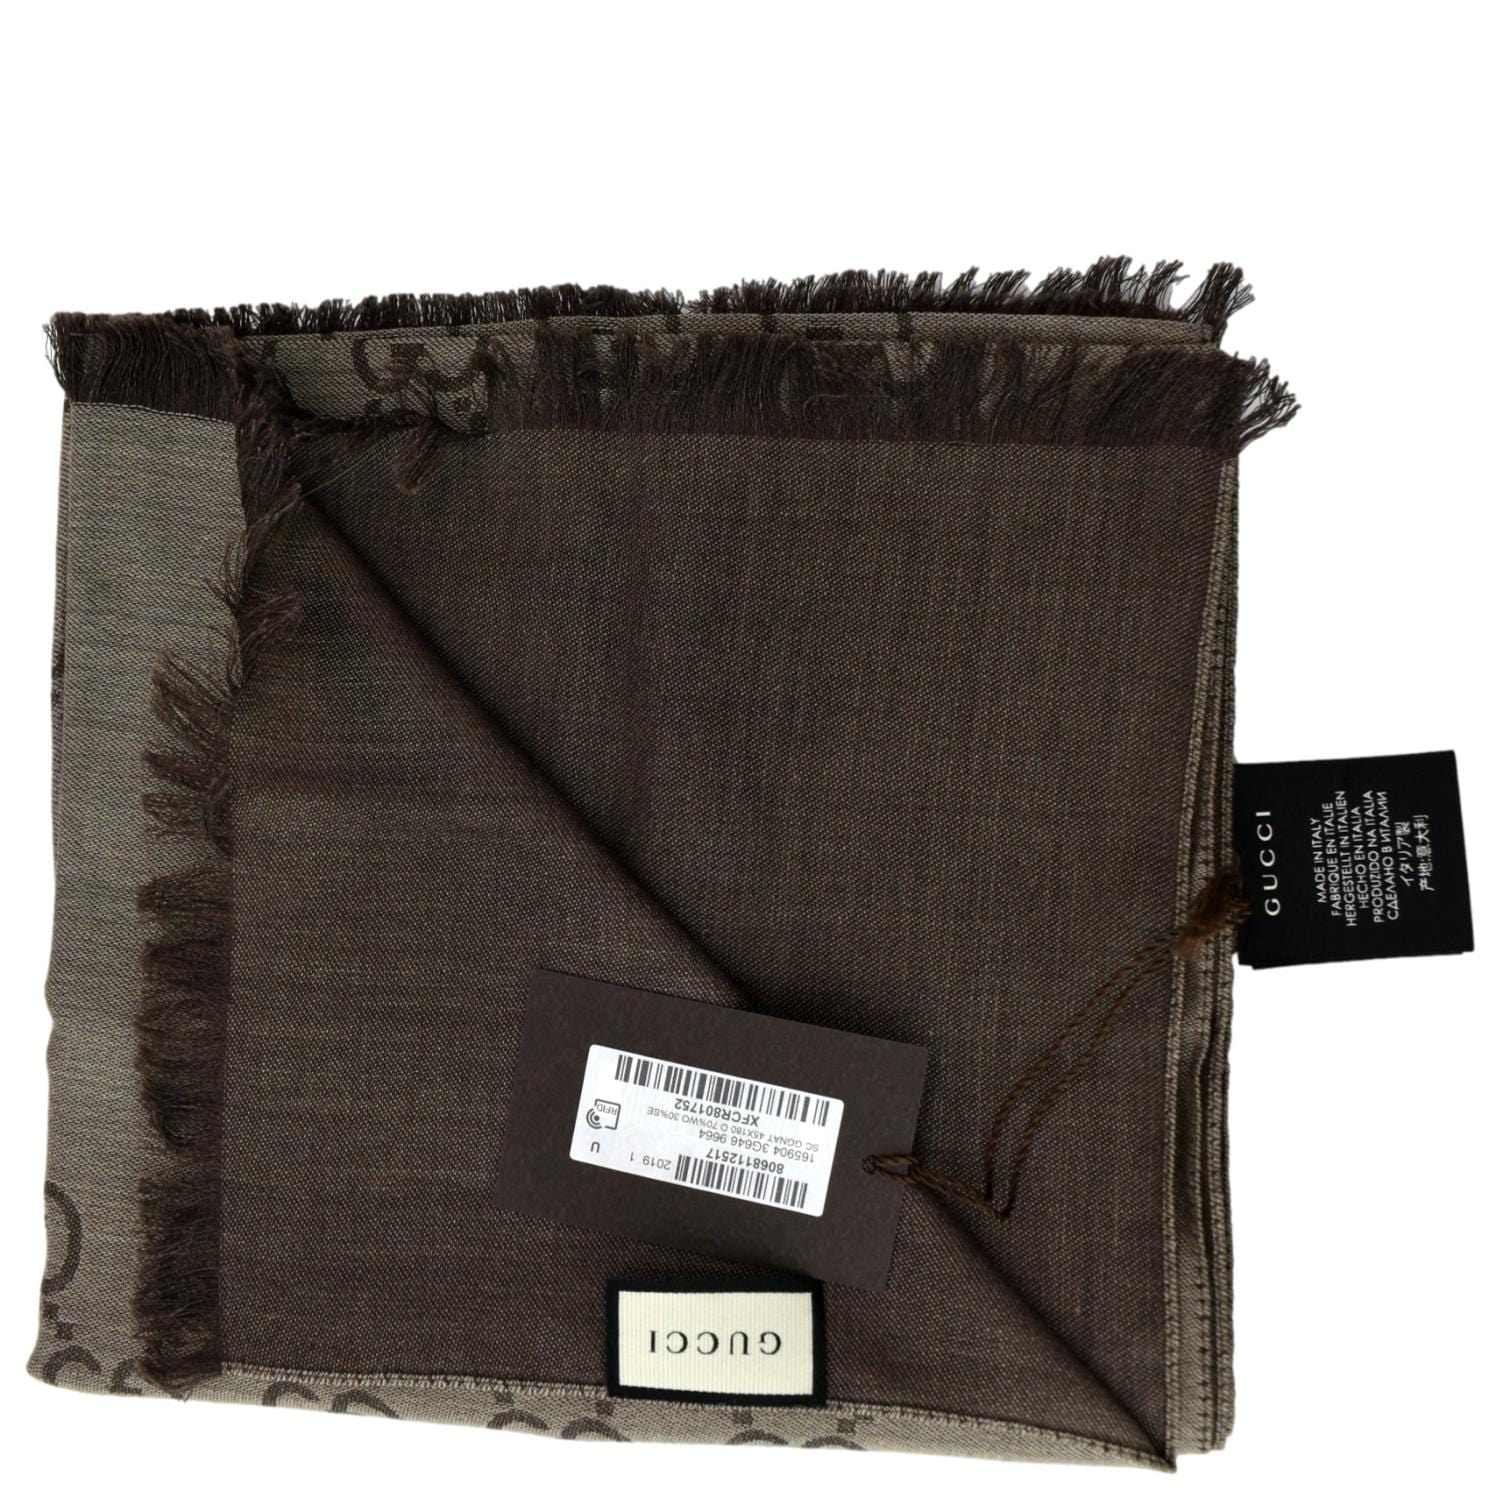 Gucci Vintage - GG Web Wool Scarf - Brown Red - Wool and Silk Scarf -  Luxury High Quality - Avvenice